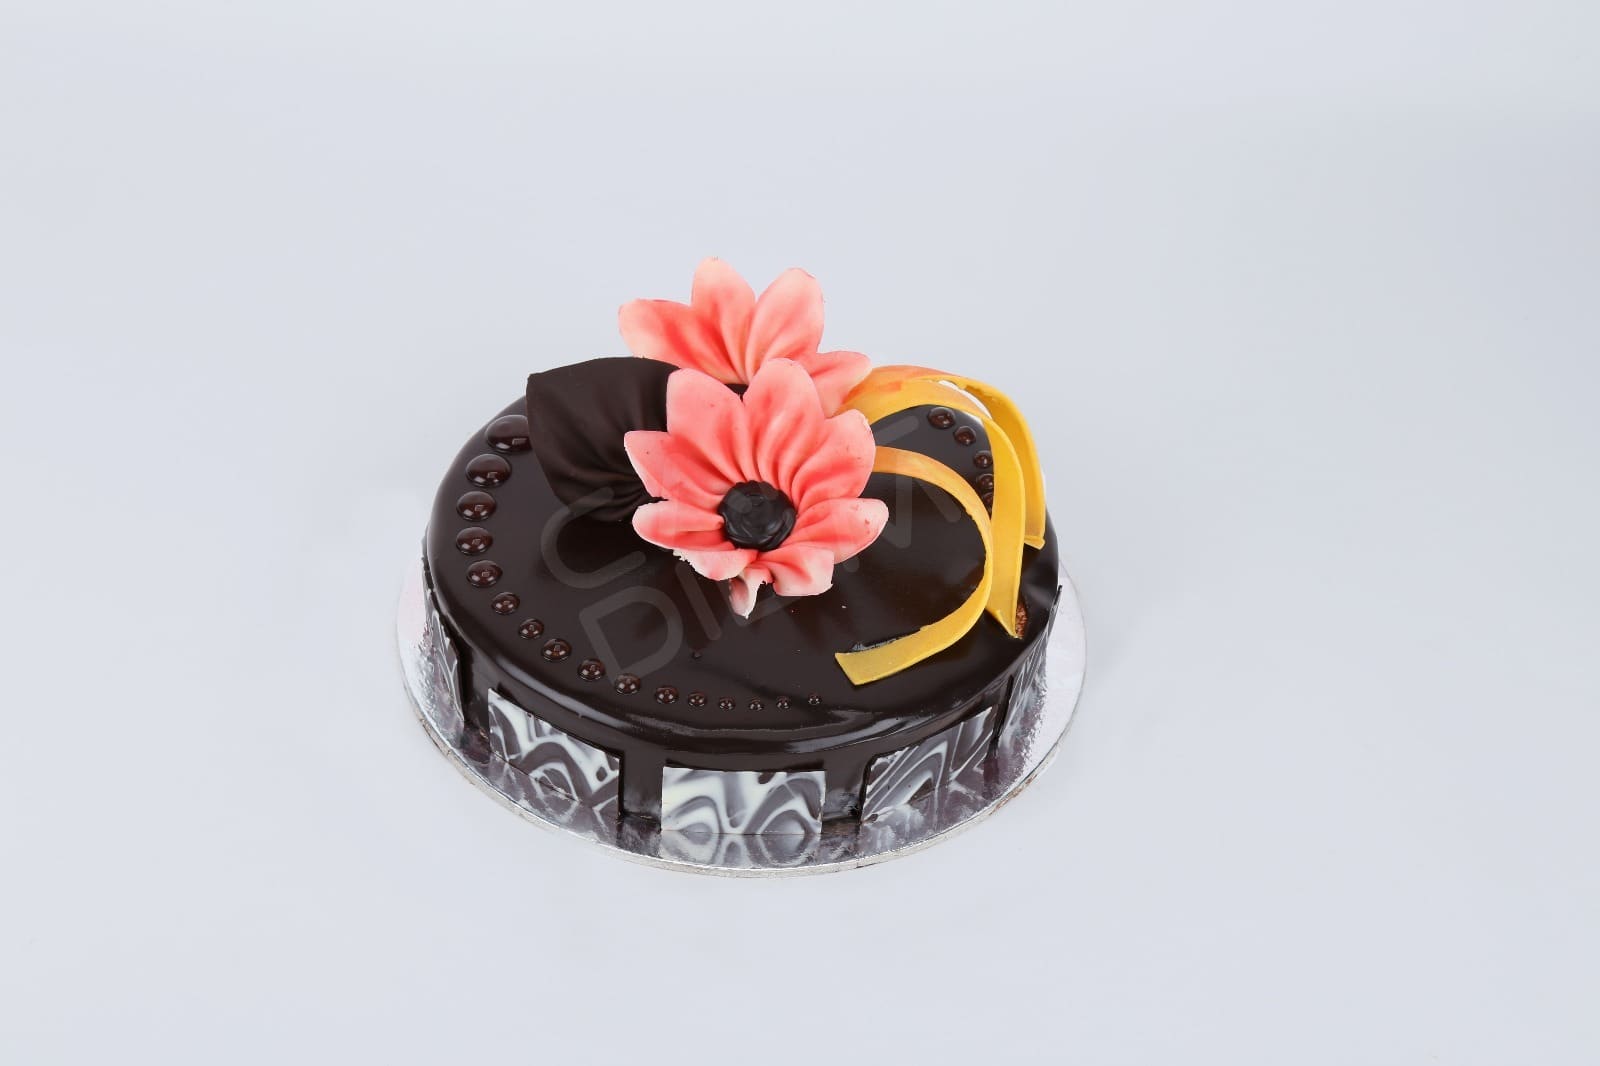 Discover more than 63 cake dilim reviews latest - awesomeenglish.edu.vn